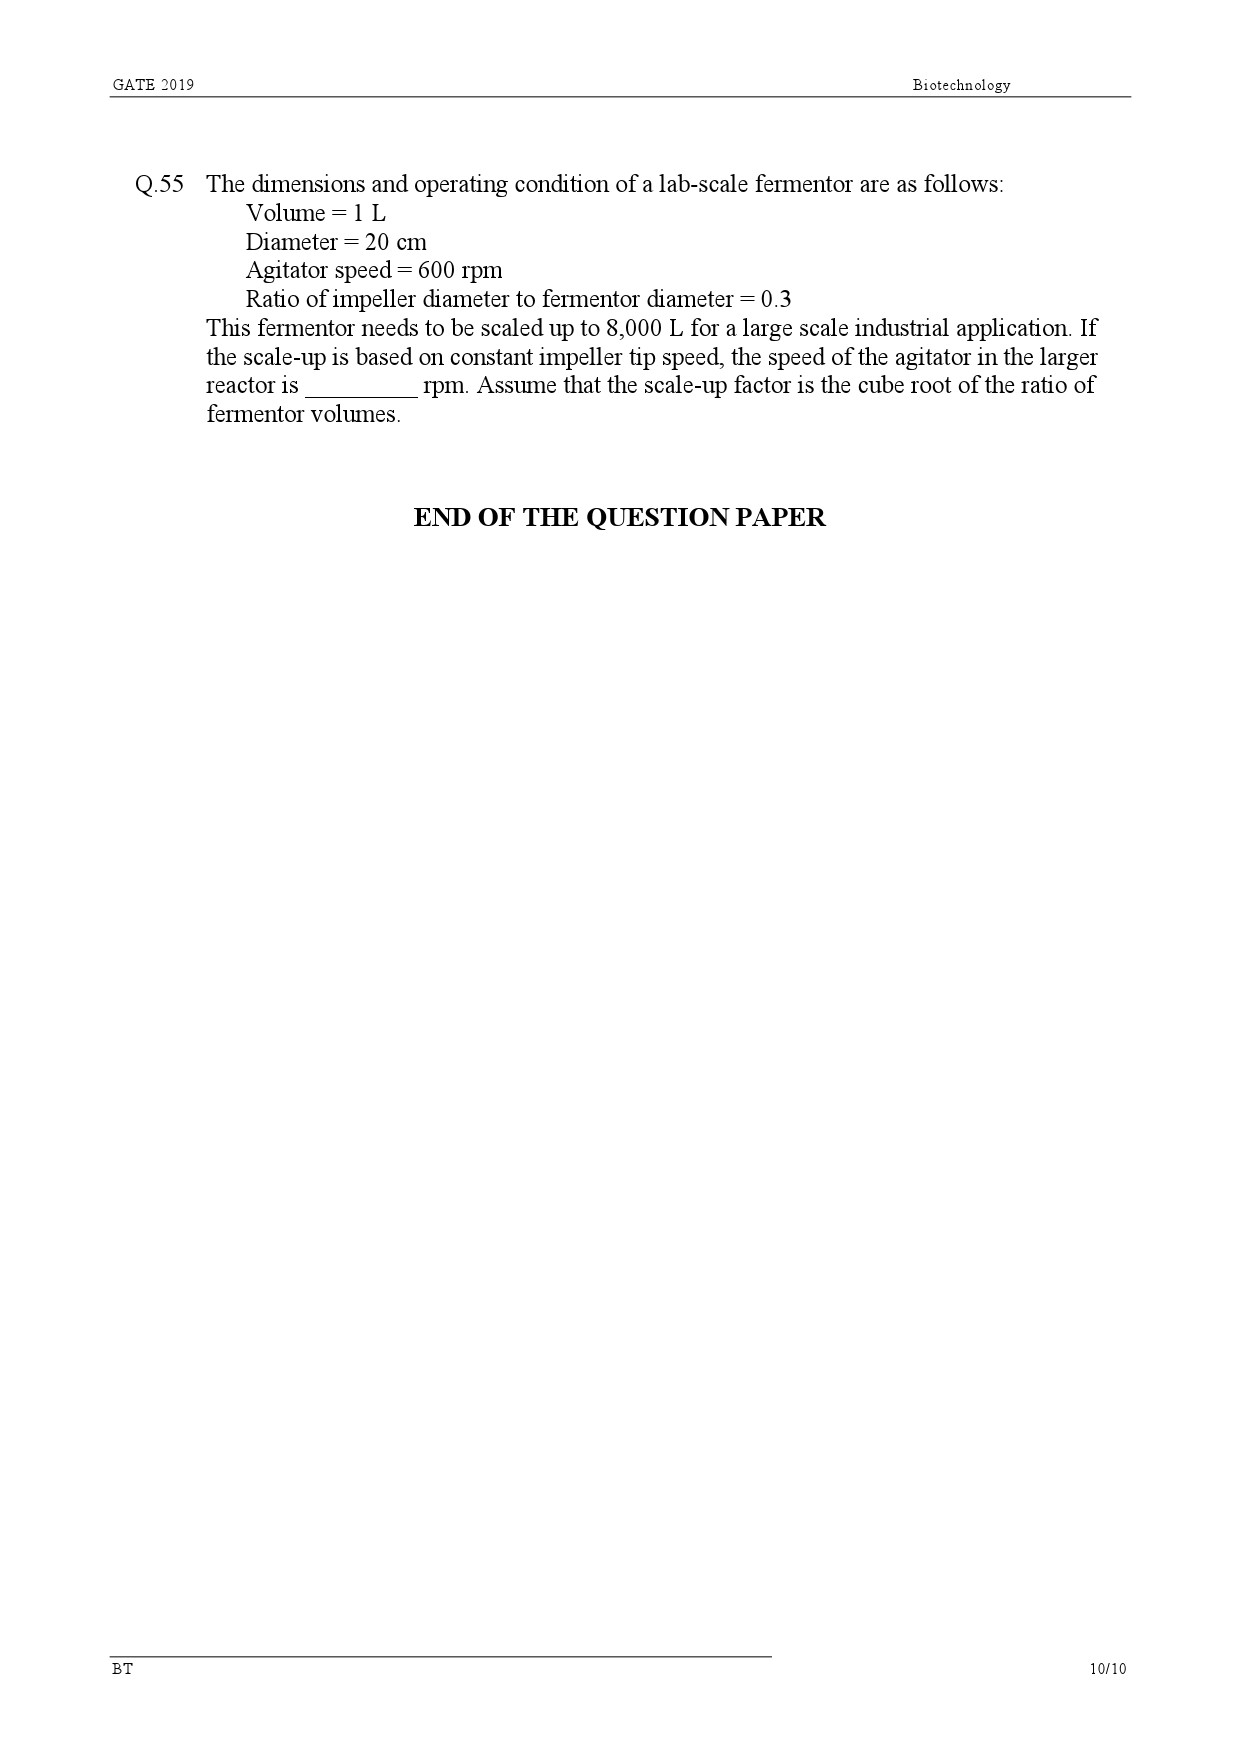 GATE Exam Question Paper 2019 Biotechnology 13